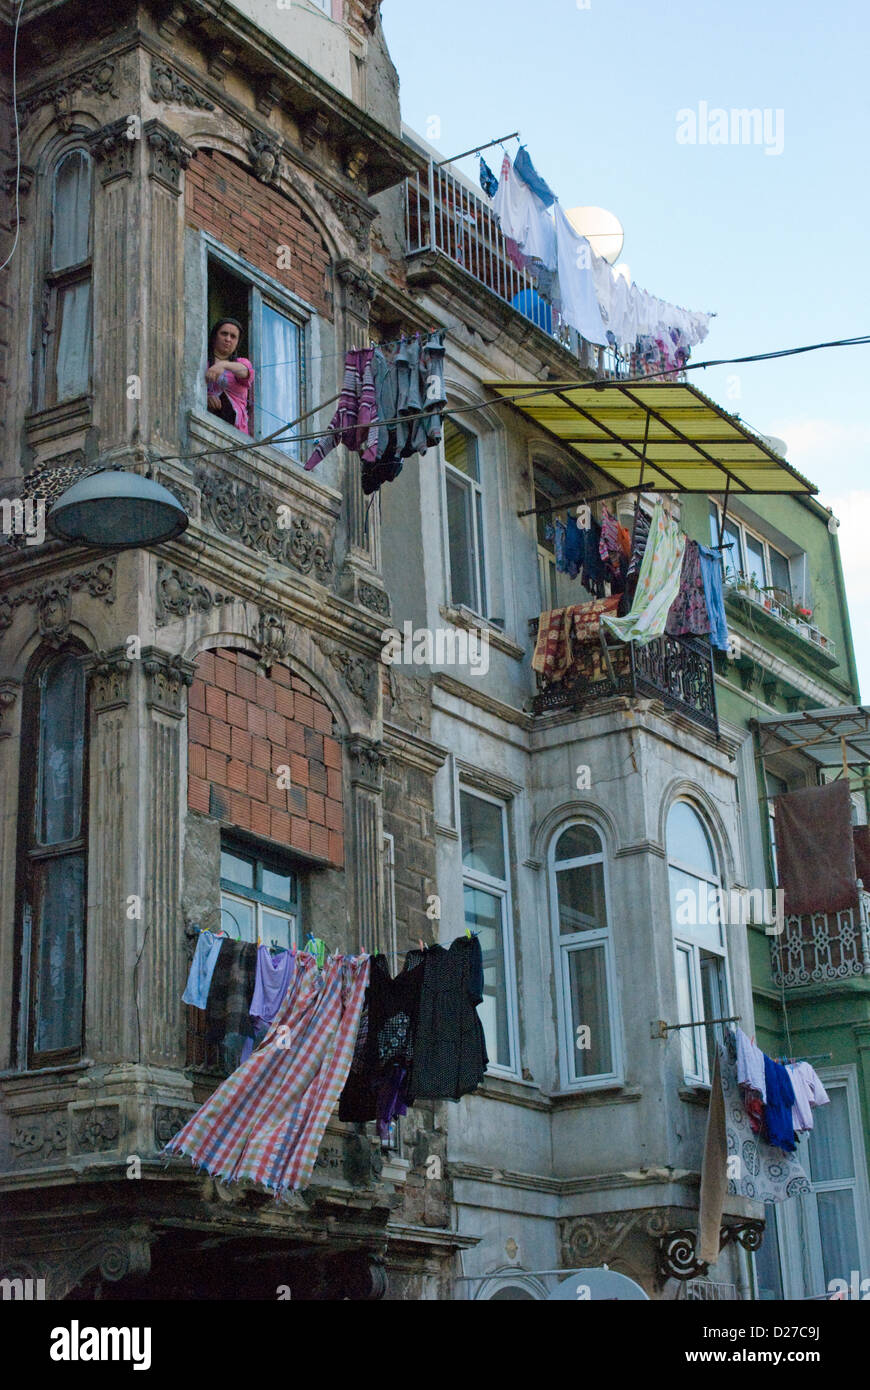 A woman at her window overlooking street in poor district Tarlabasi, Istanbul. Locals hang their washing out across the street. Stock Photo